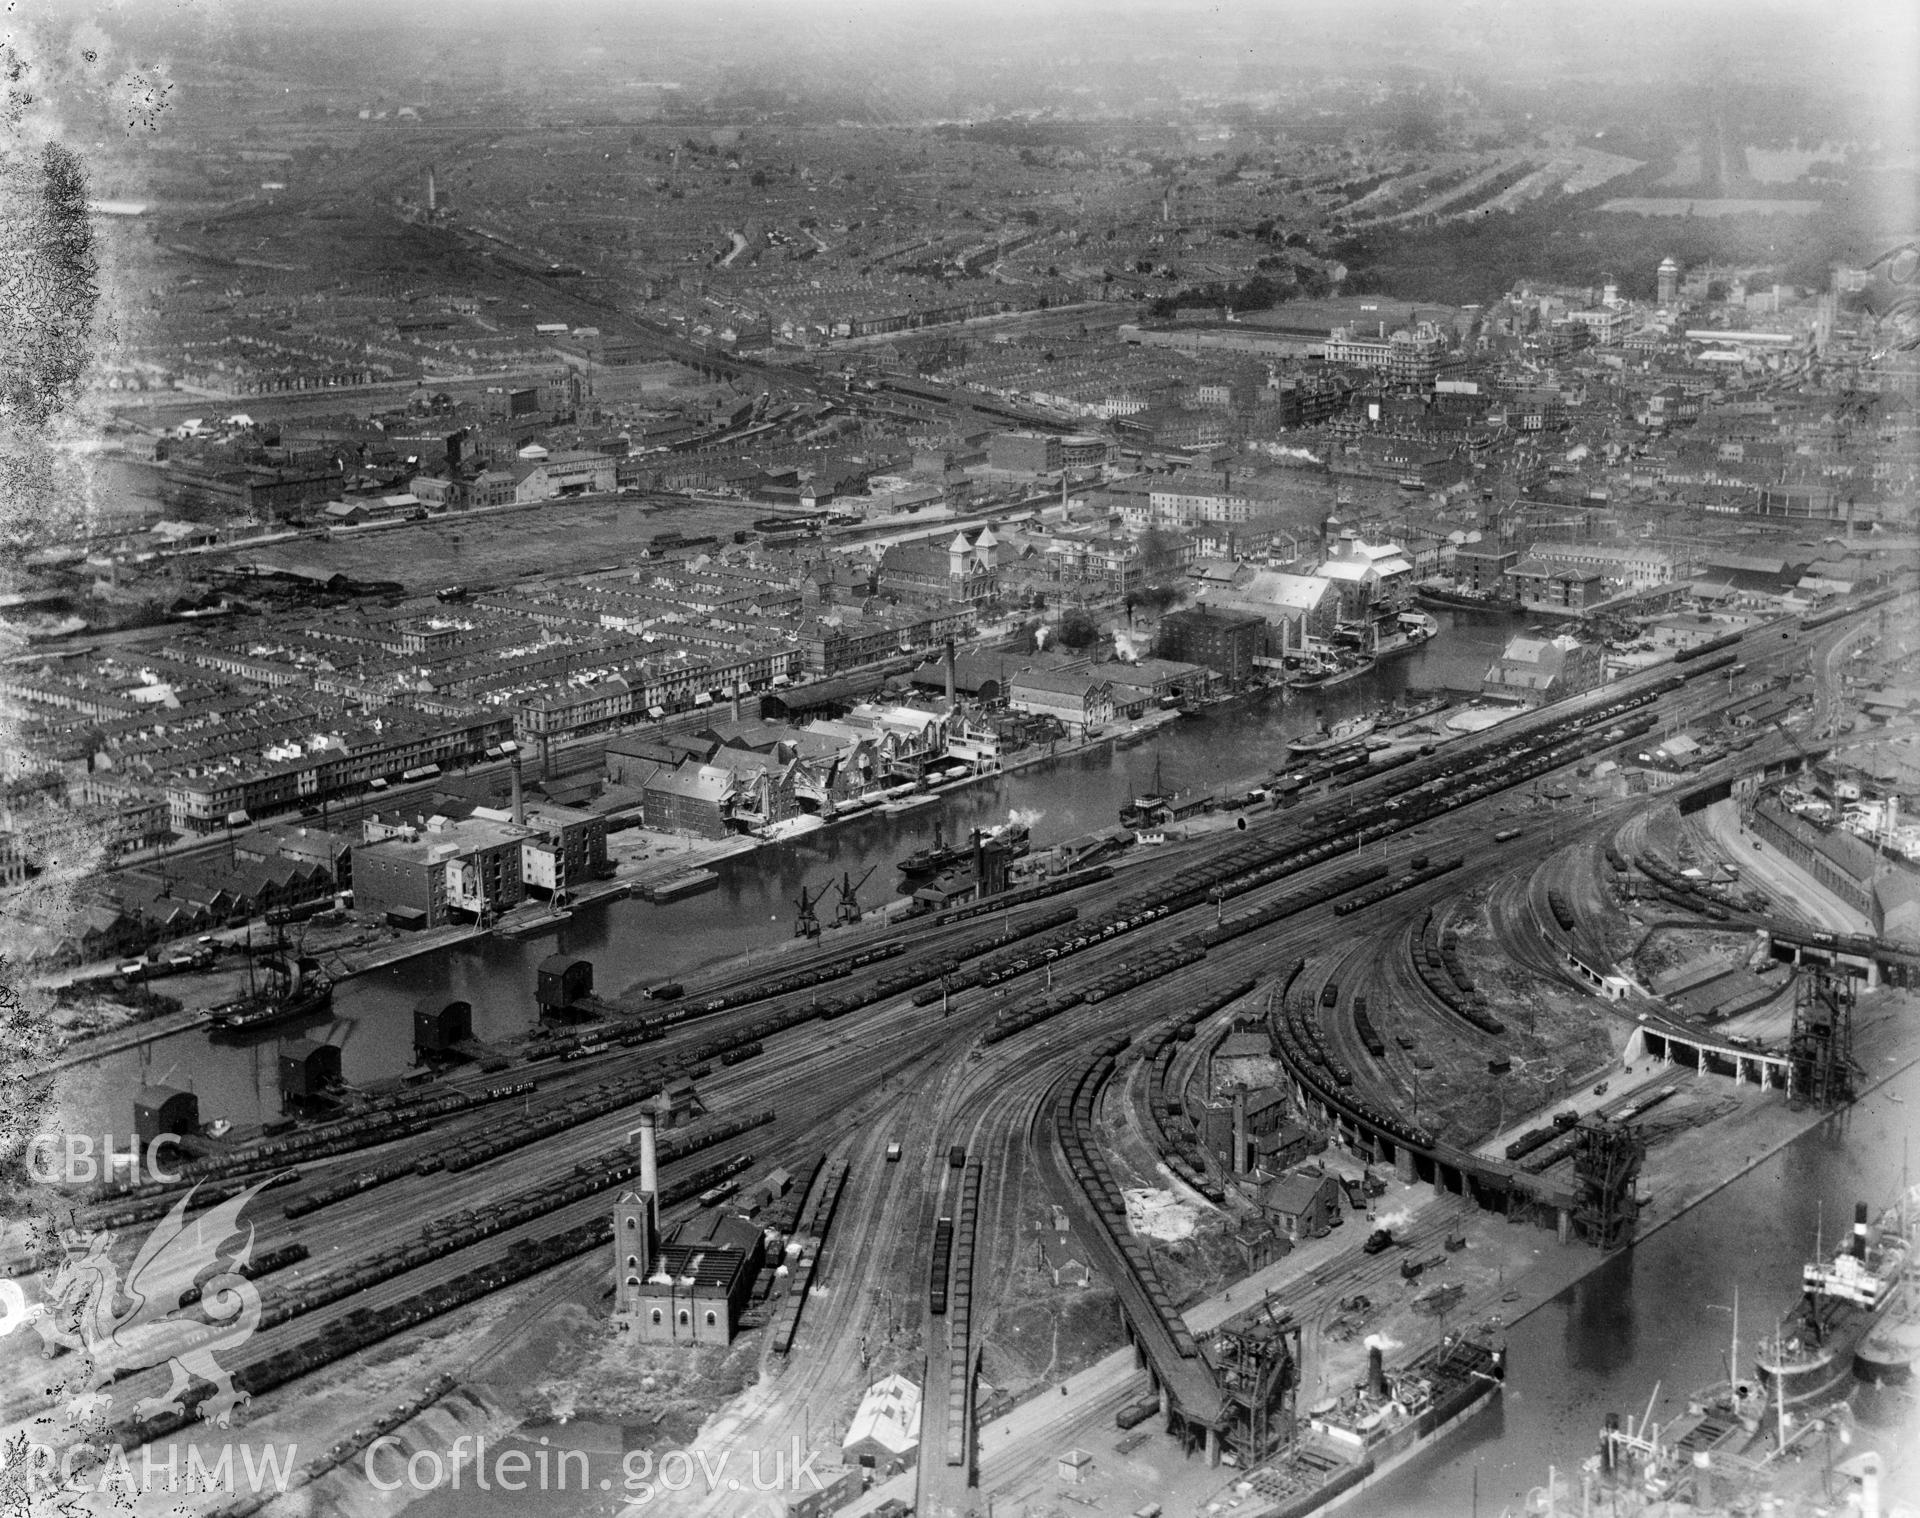 Bute East Dock, Cardiff showing the Spillers Factory, oblique aerial view. 5?x4? black and white glass plate negative.